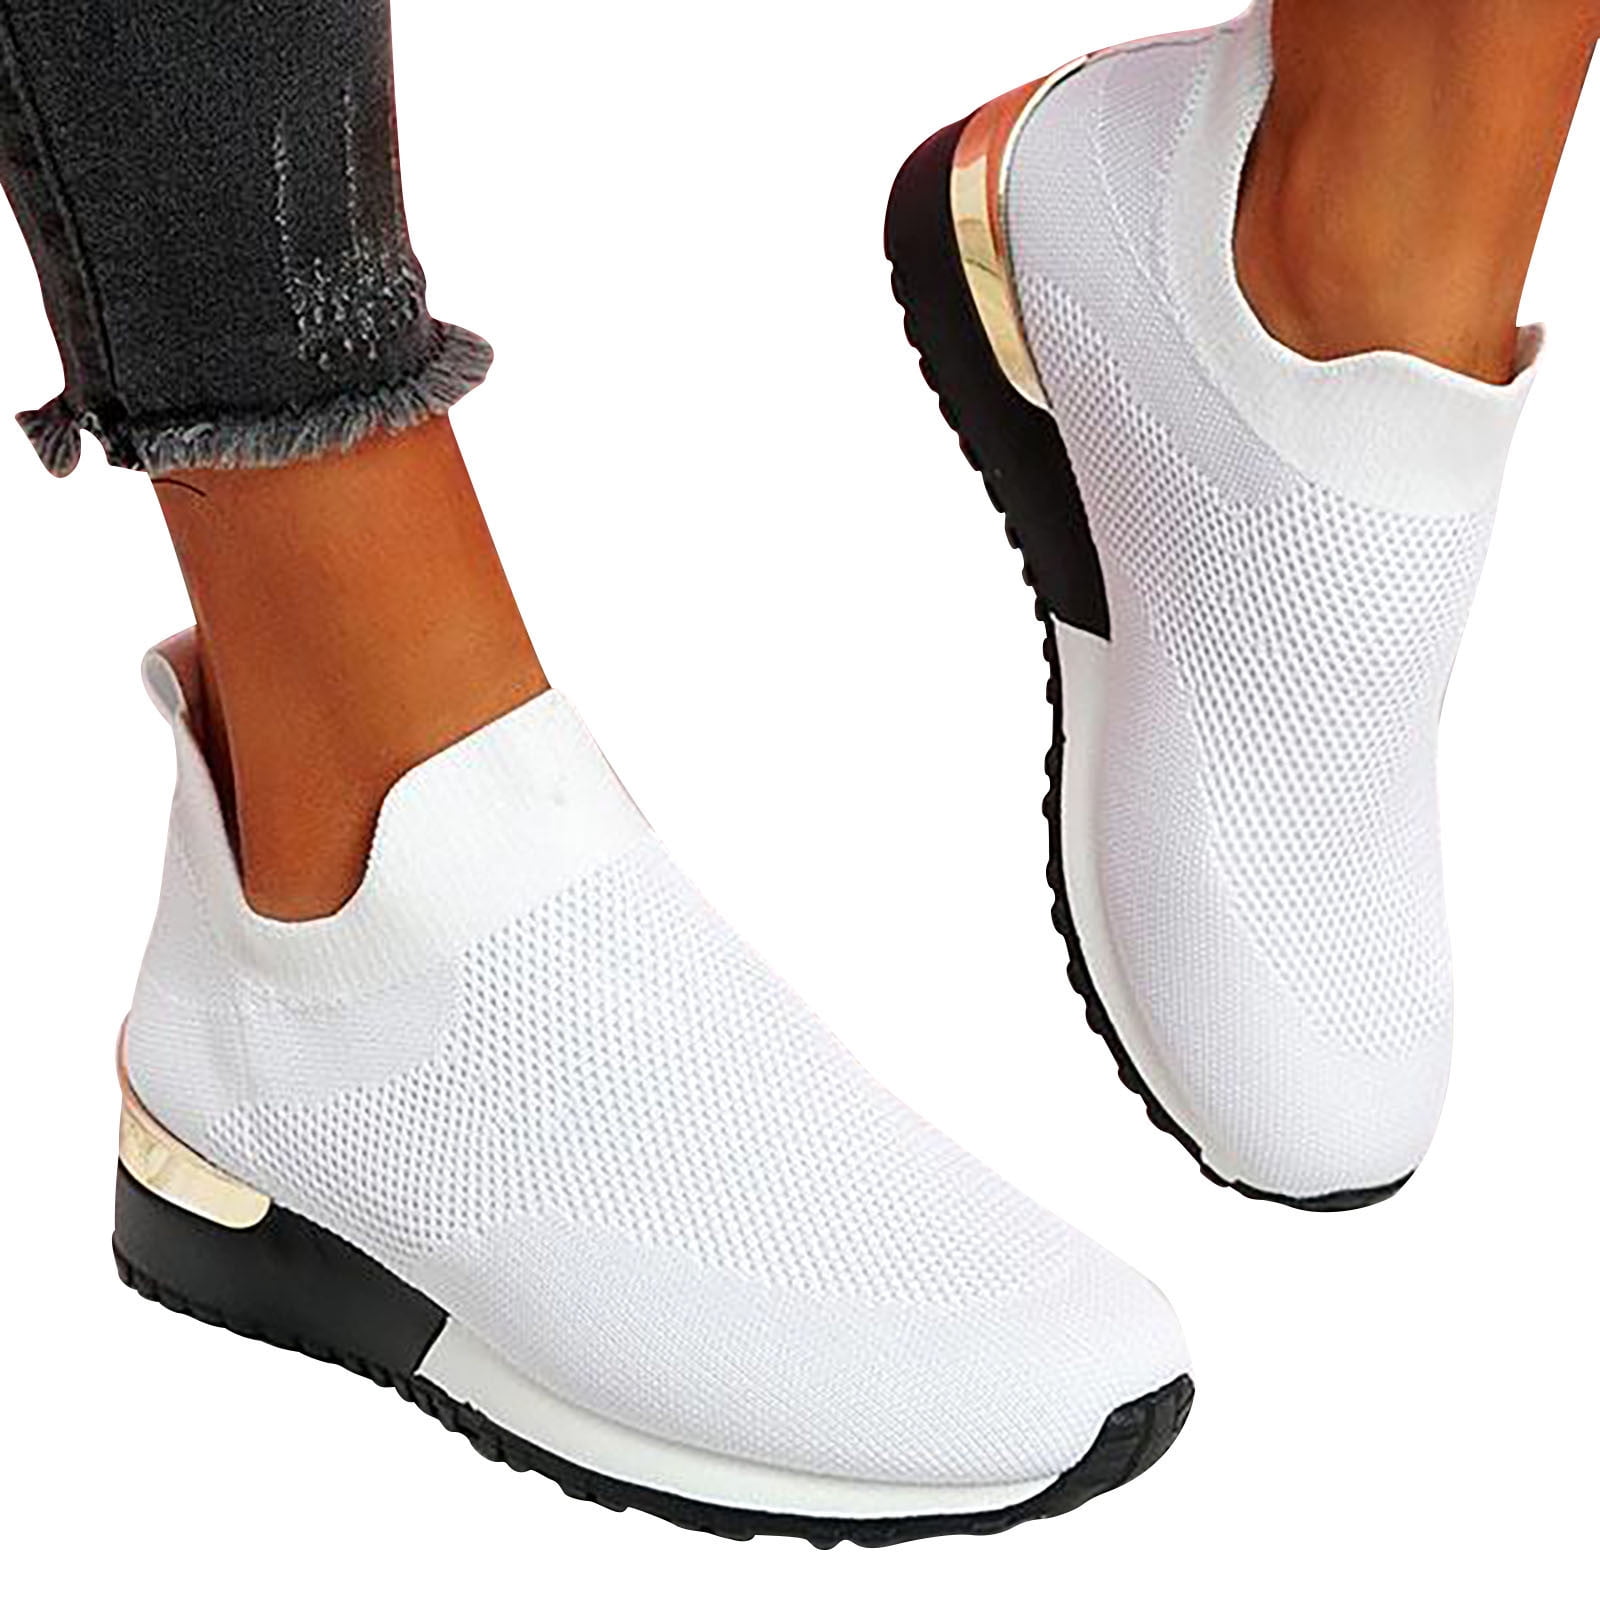 gakvov Wedge Sneakers For Women Walking Shoes Sock Sneakers Arch Fit ...